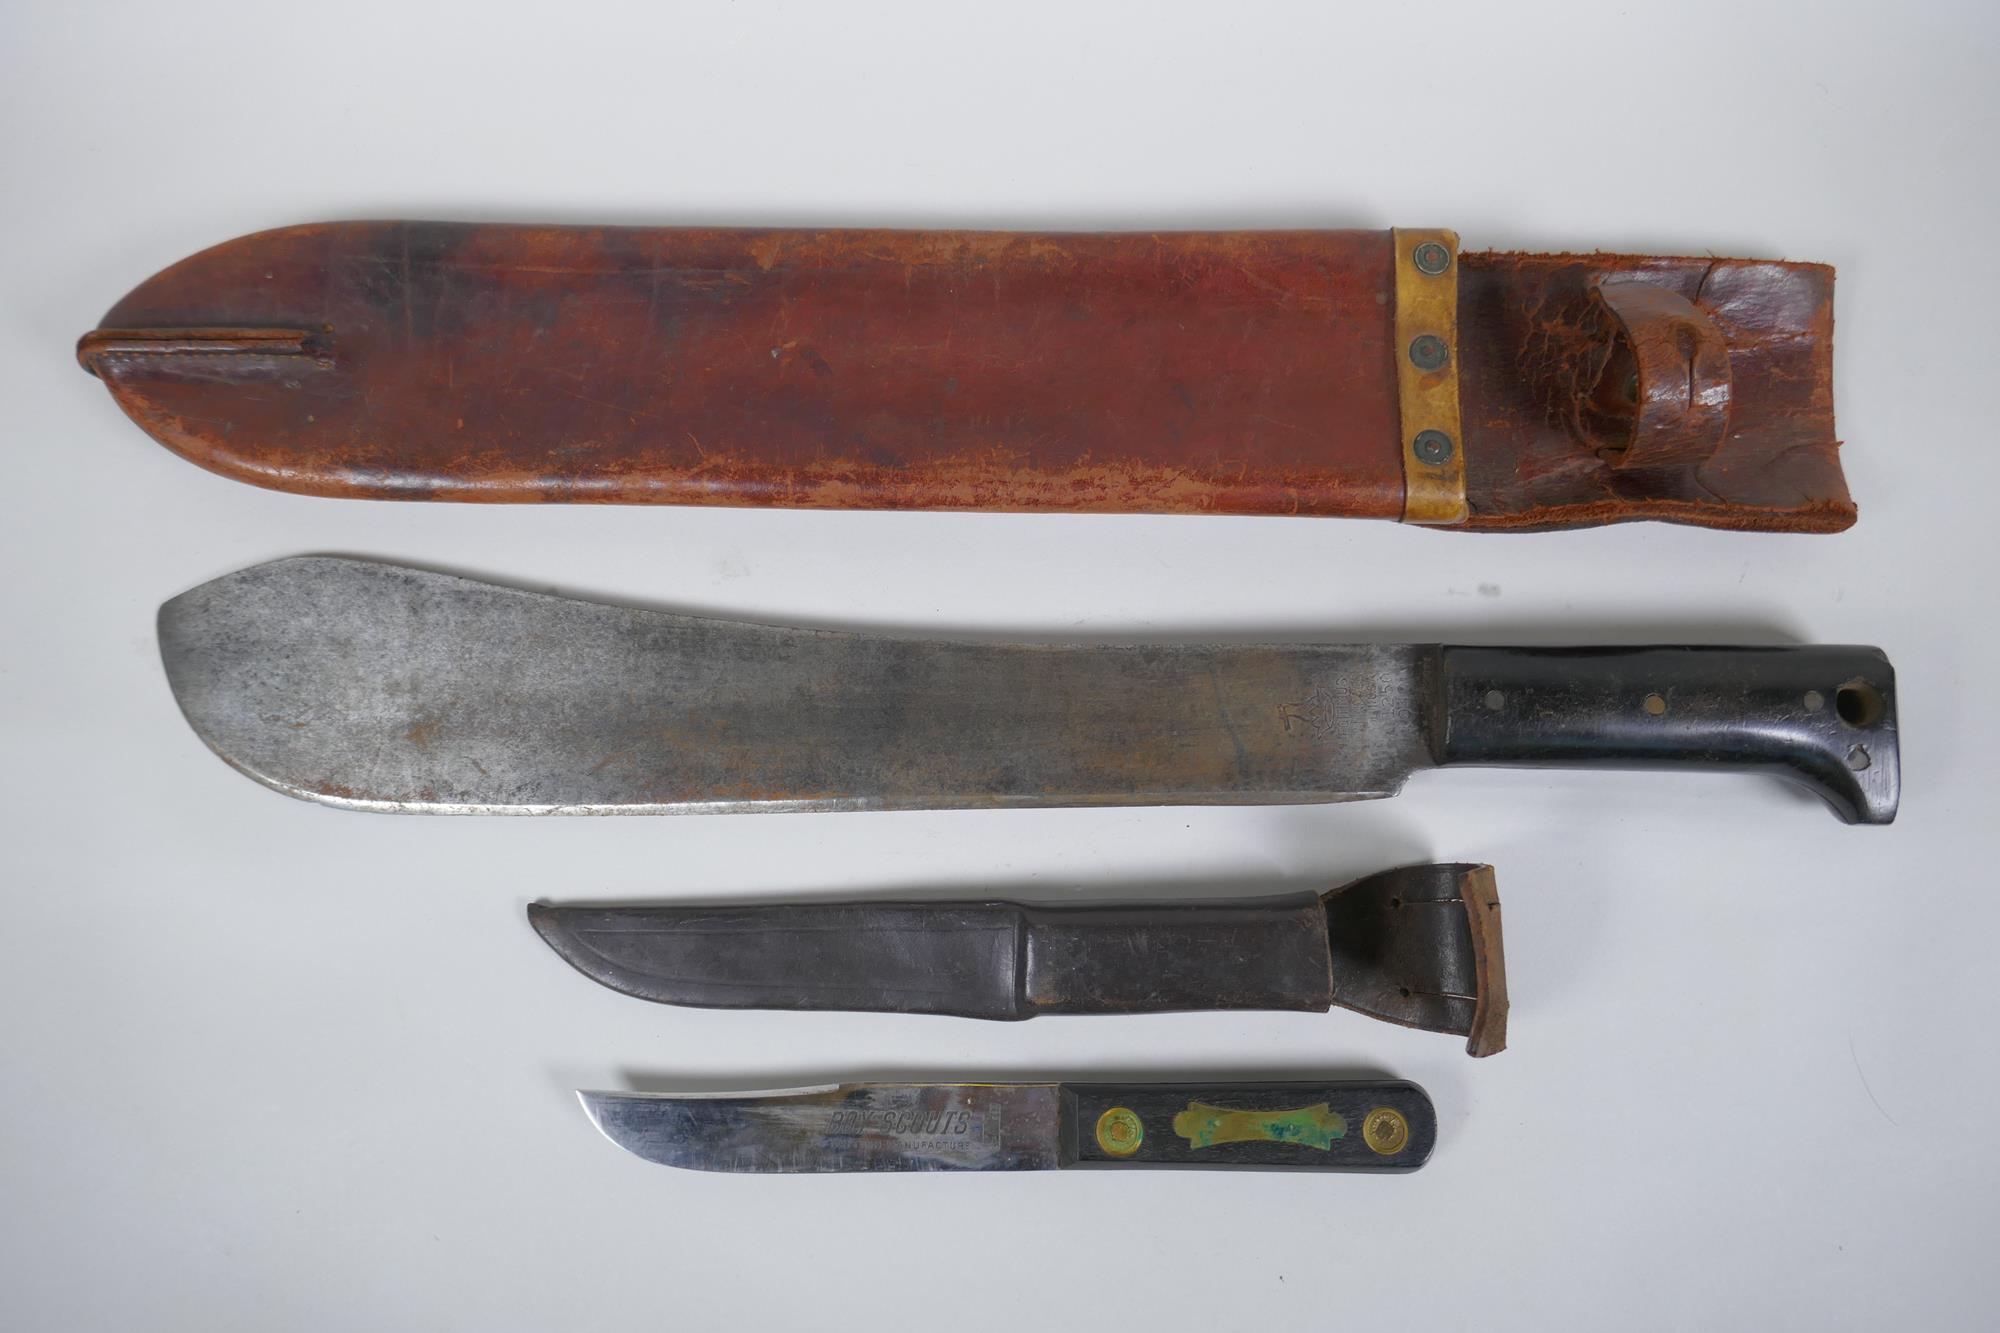 A WWII US made machete by Legitimus Collins & Co, model no. 1250, and a British made Boy Scout's